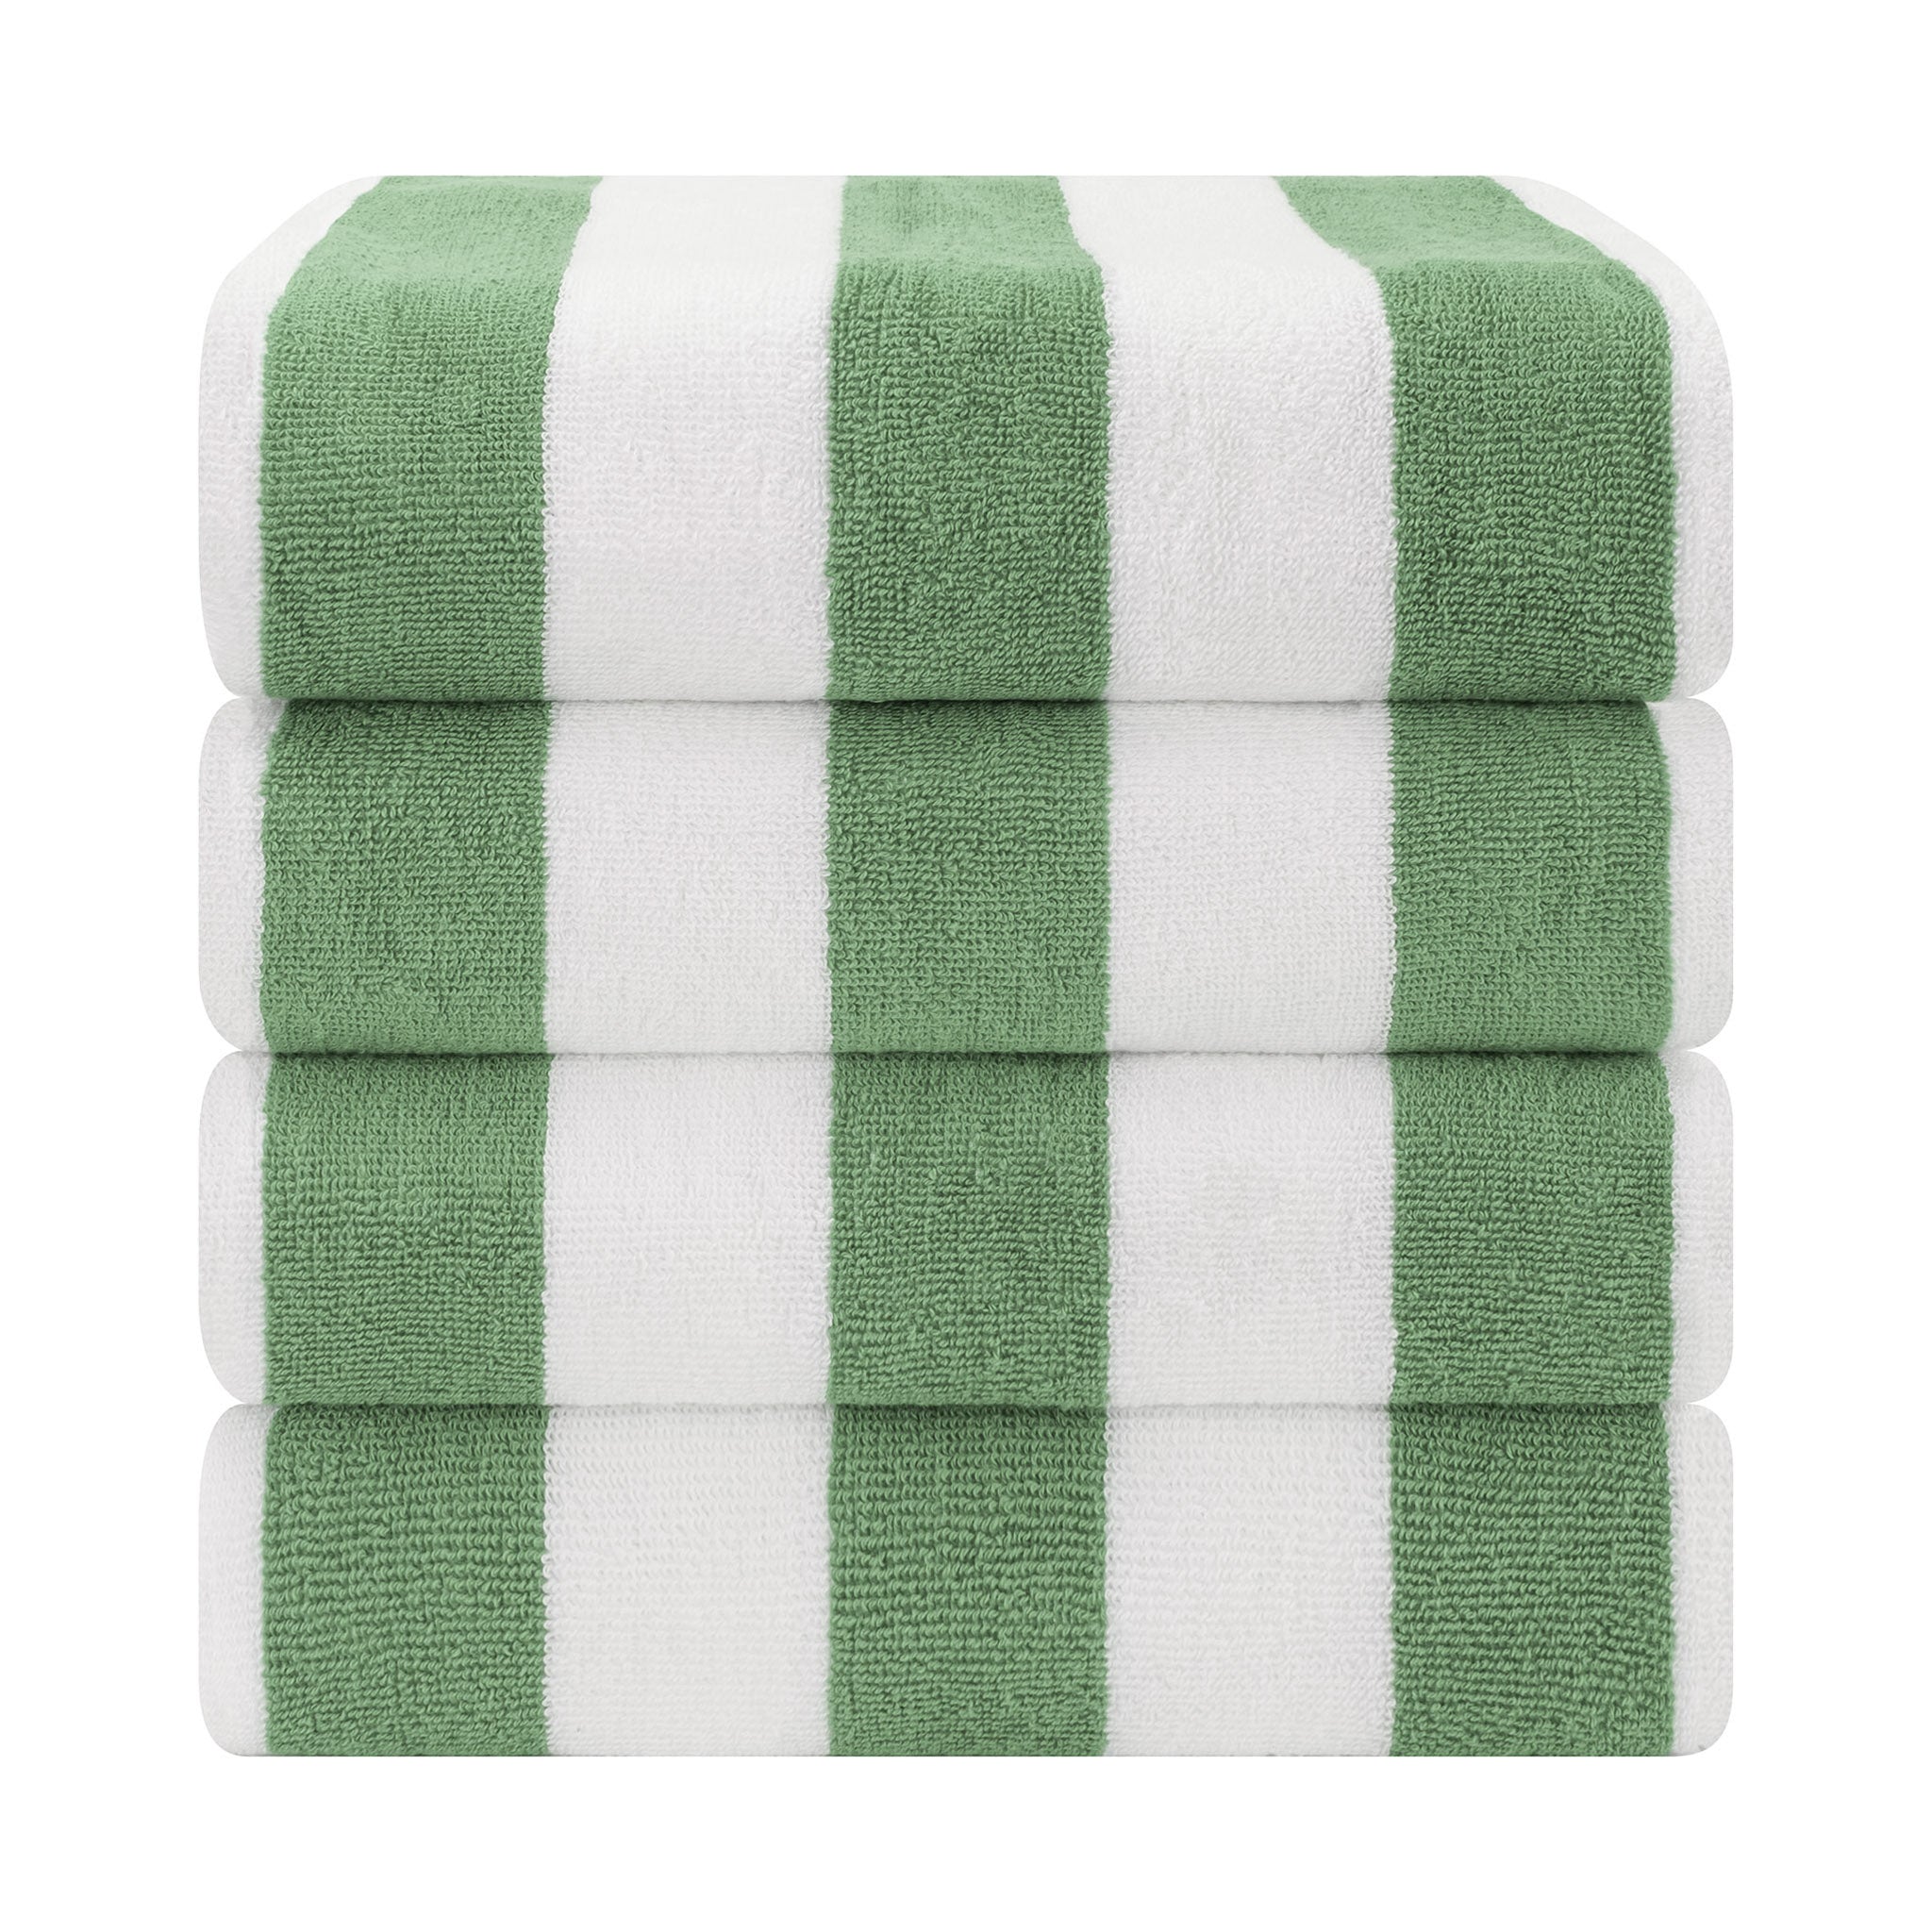 American Soft Linen 100% Cotton 4 Pack Beach Towels Cabana Striped Pool Towels -sage-green-2